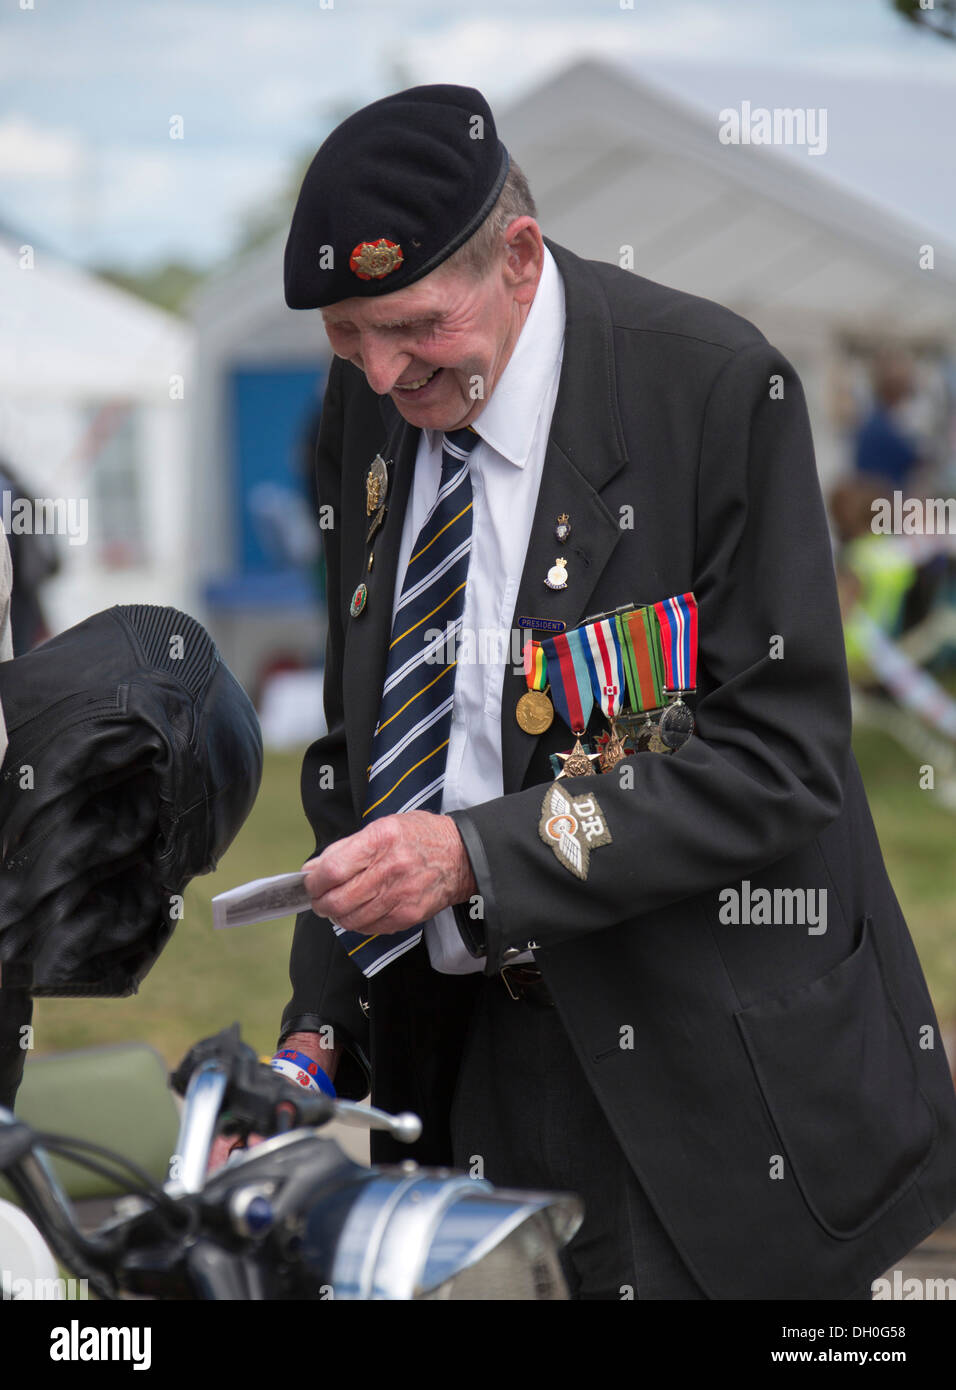 Veteran from 2nd world war with many  medals distinctions on jacket 127899 Stock Photo